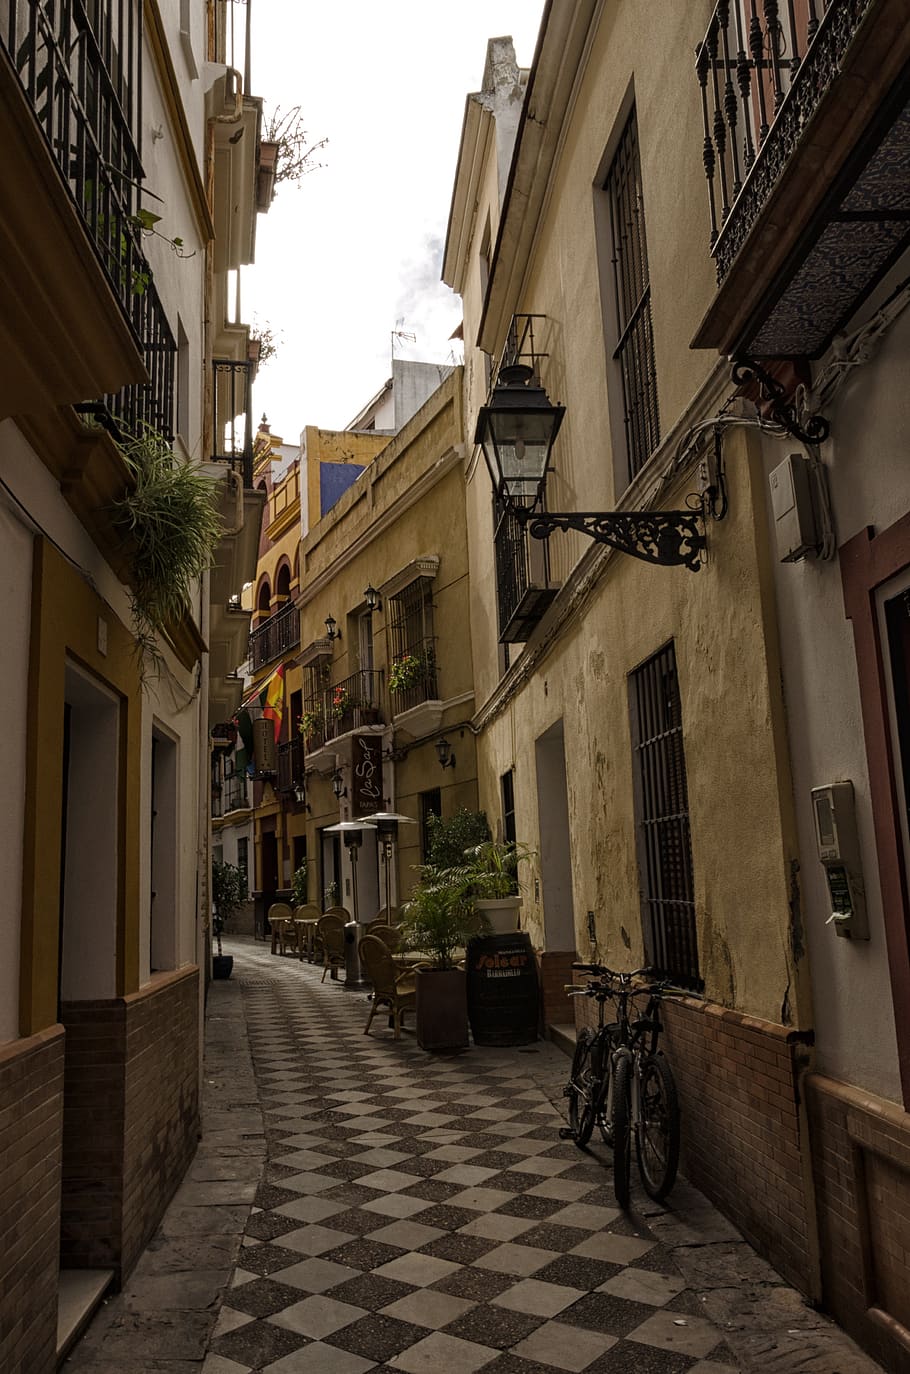 architecture, road, city, house, seville, spain, andalusia, alley, building, urban